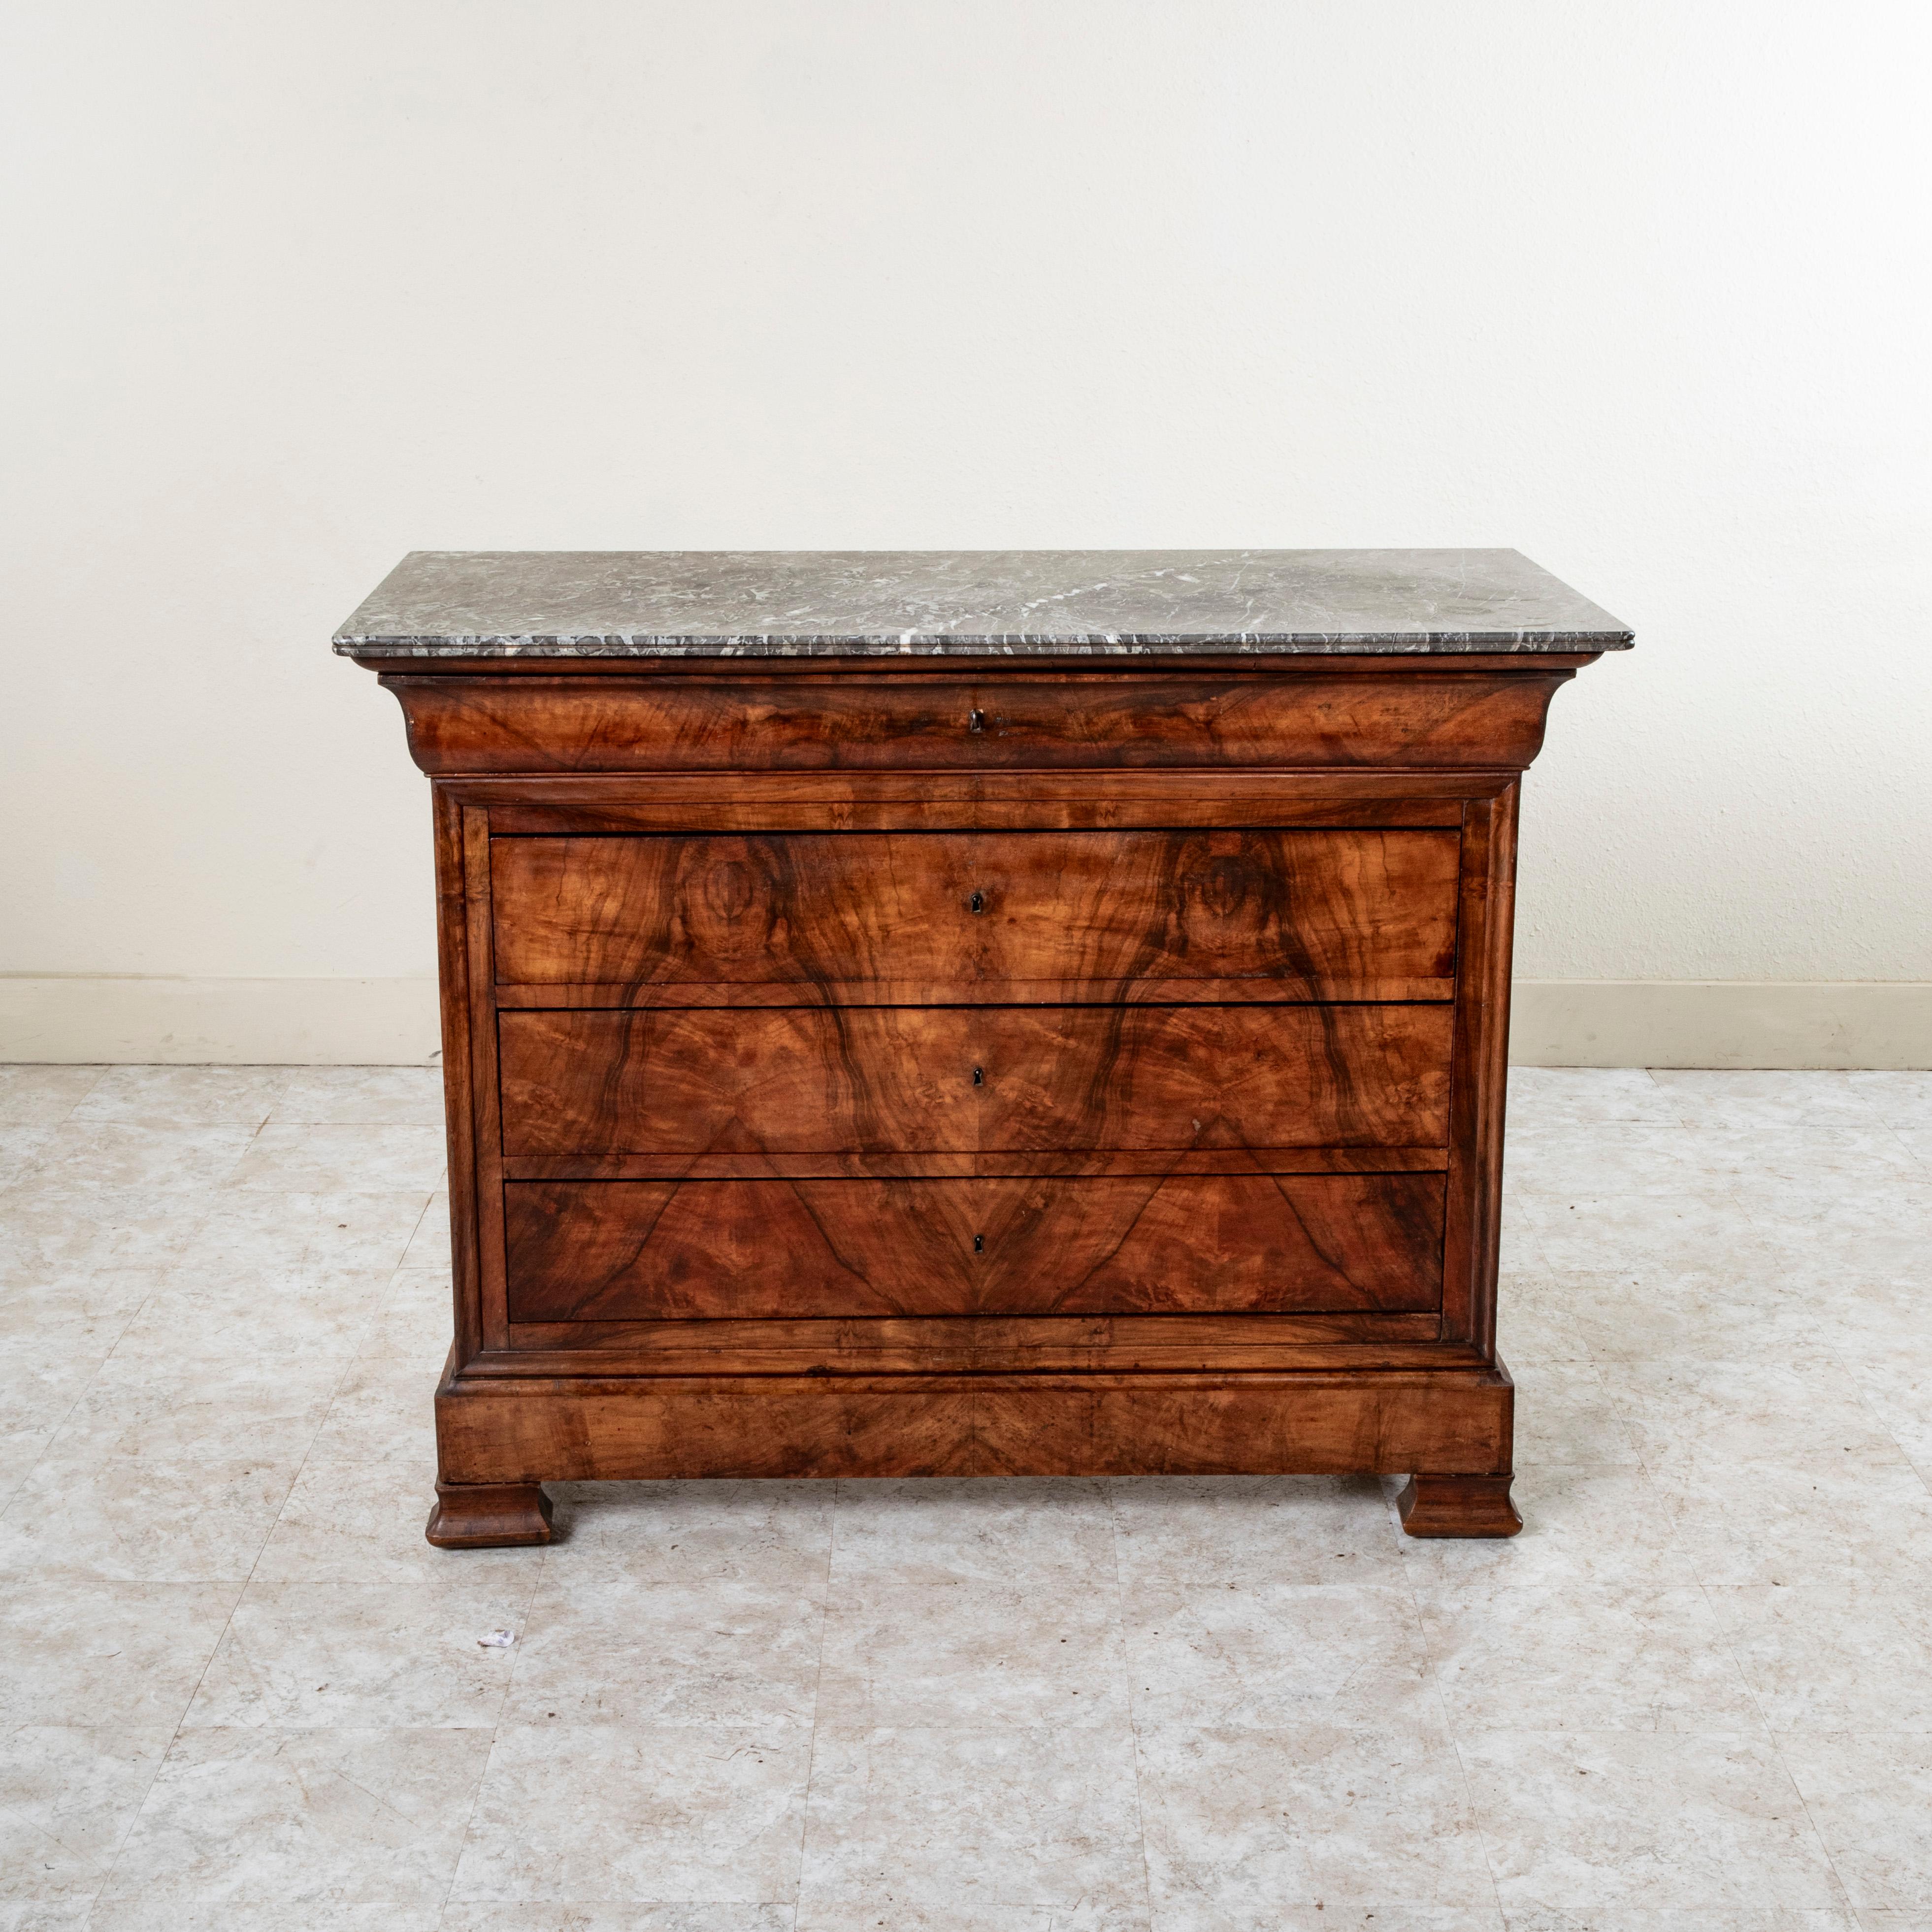 This quintessential Louis Philippe period commode or chest of drawers displays the exemplary craftsmanship of the early nineteenth century with a facade of book matched burl walnut and solid walnut panel sides. The piece is capped with a double